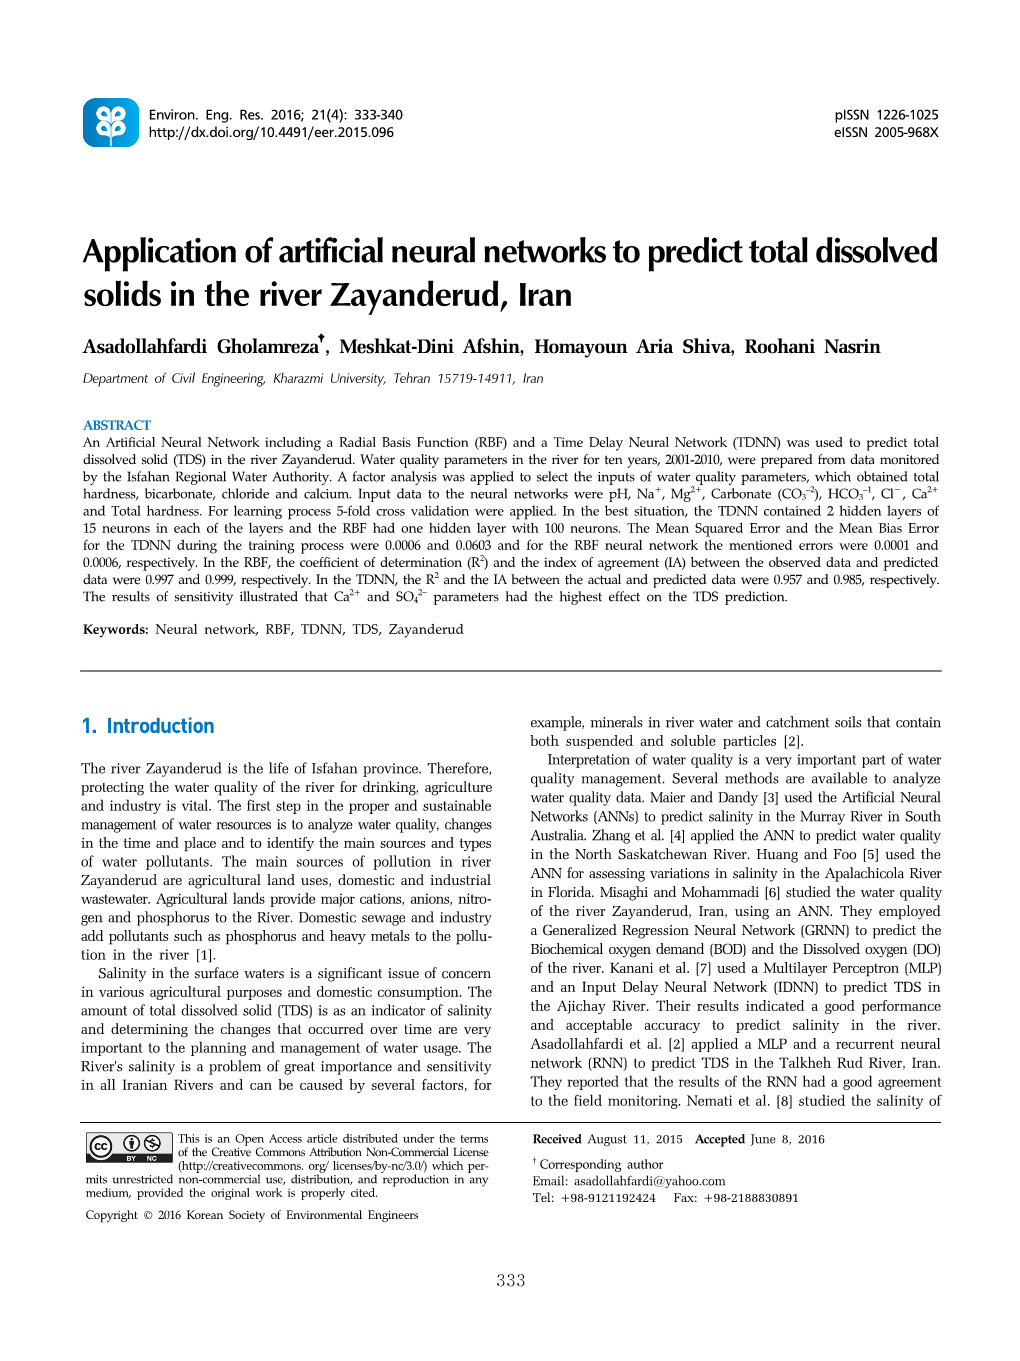 Application of Artificial Neural Networks to Predict Total Dissolved Solids in the River Zayanderud, Iran